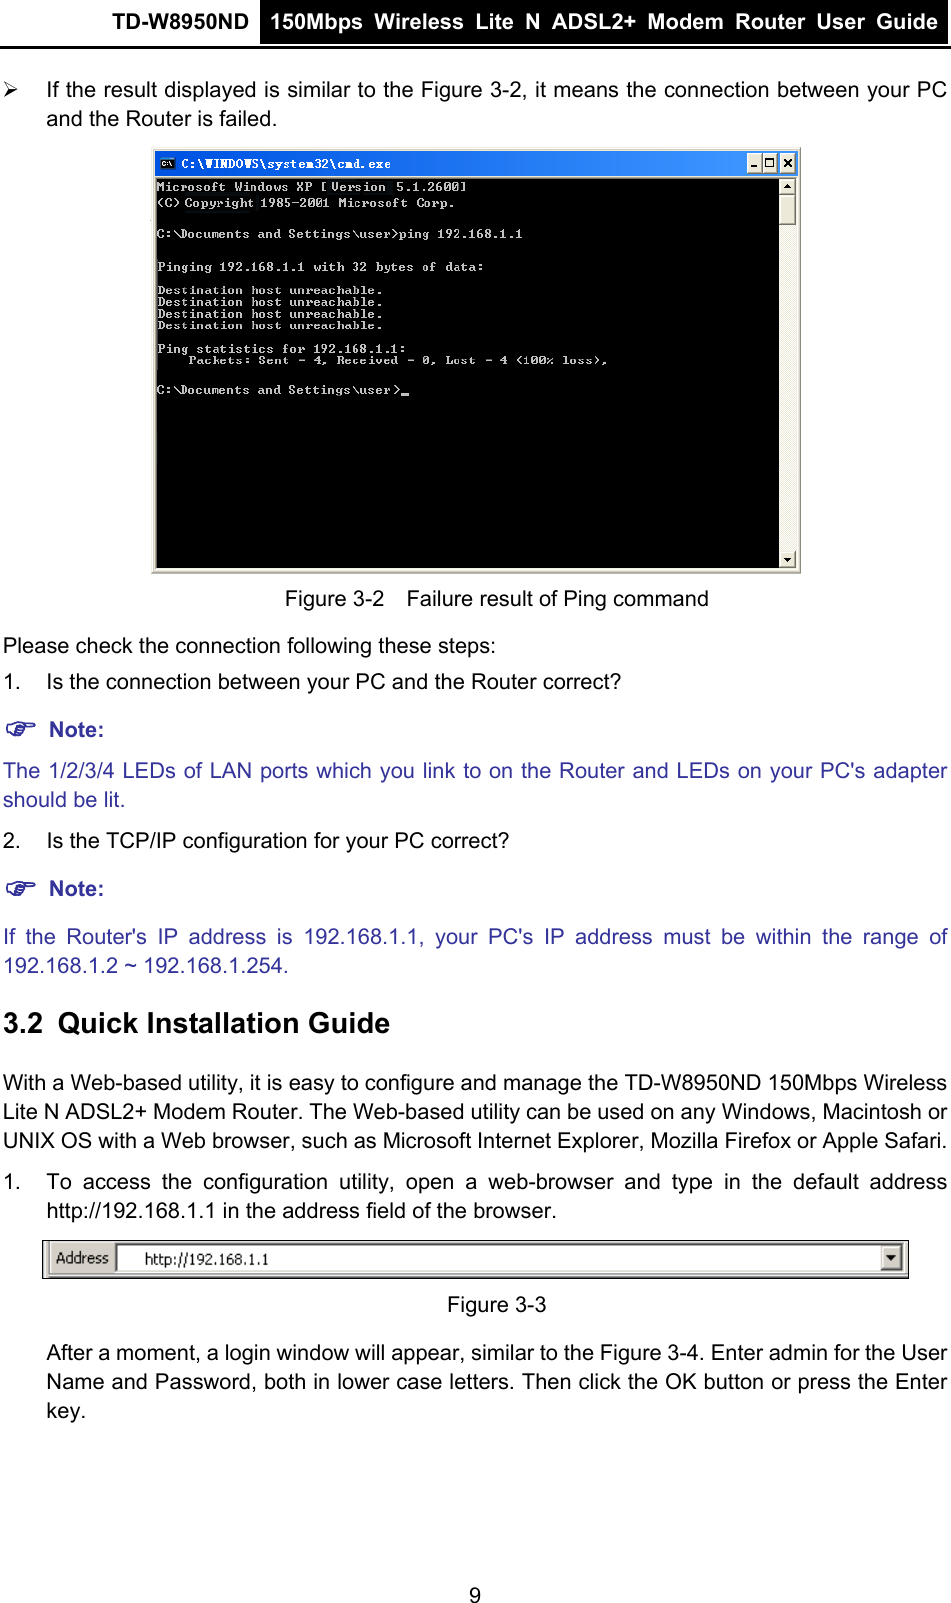 TD-W8950ND  150Mbps Wireless Lite N ADSL2+ Modem Router User Guide  ¾  If the result displayed is similar to the Figure 3-2, it means the connection between your PC and the Router is failed.    Figure 3-2    Failure result of Ping command Please check the connection following these steps: 1.  Is the connection between your PC and the Router correct? ) Note: The 1/2/3/4 LEDs of LAN ports which you link to on the Router and LEDs on your PC&apos;s adapter should be lit. 2.  Is the TCP/IP configuration for your PC correct? ) Note: If the Router&apos;s IP address is 192.168.1.1, your PC&apos;s IP address must be within the range of 192.168.1.2 ~ 192.168.1.254. 3.2  Quick Installation Guide With a Web-based utility, it is easy to configure and manage the TD-W8950ND 150Mbps Wireless Lite N ADSL2+ Modem Router. The Web-based utility can be used on any Windows, Macintosh or UNIX OS with a Web browser, such as Microsoft Internet Explorer, Mozilla Firefox or Apple Safari. 1.  To access the configuration utility, open a web-browser and type in the default address http://192.168.1.1 in the address field of the browser.  Figure 3-3 After a moment, a login window will appear, similar to the Figure 3-4. Enter admin for the User Name and Password, both in lower case letters. Then click the OK button or press the Enter key. 9 